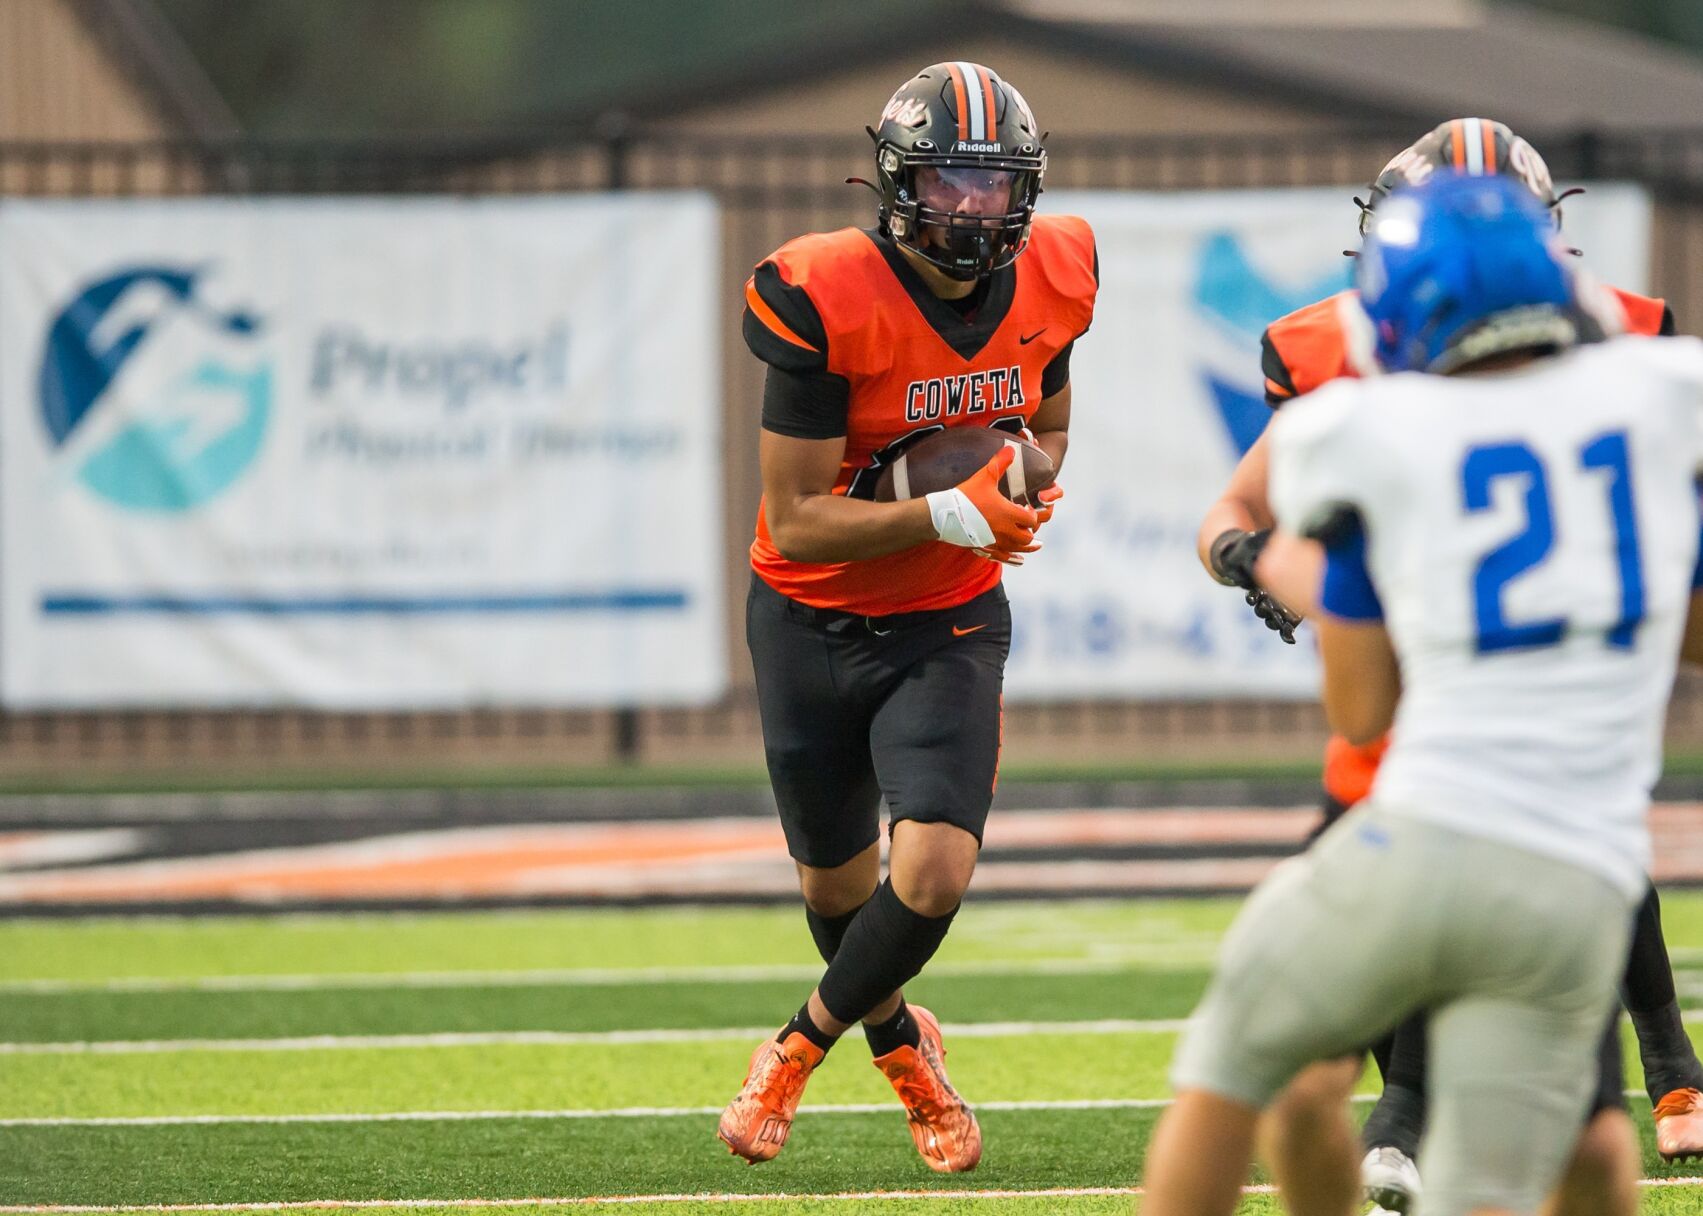 Coweta, Central rally with late TDs to win in fantastic finishes